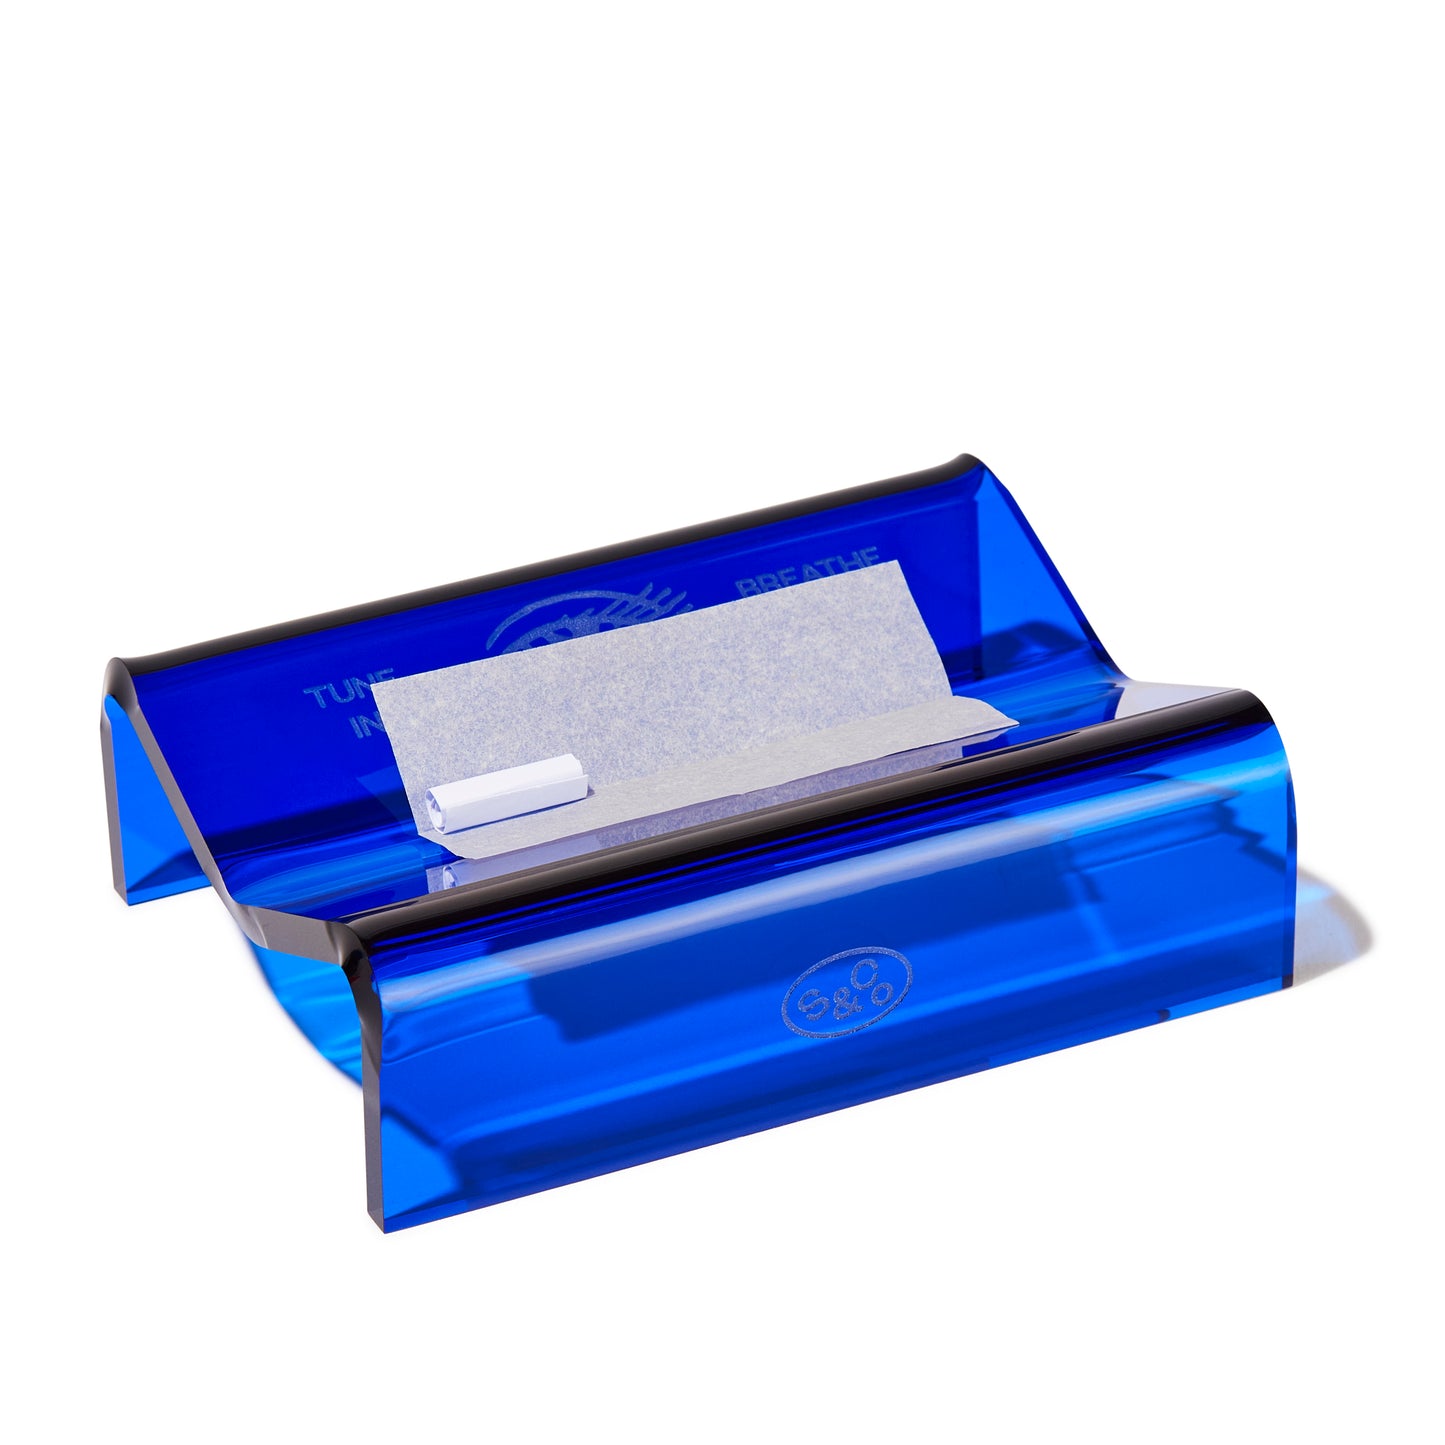 BLUE GELLY ROLLING STAND - Sackville & Co.